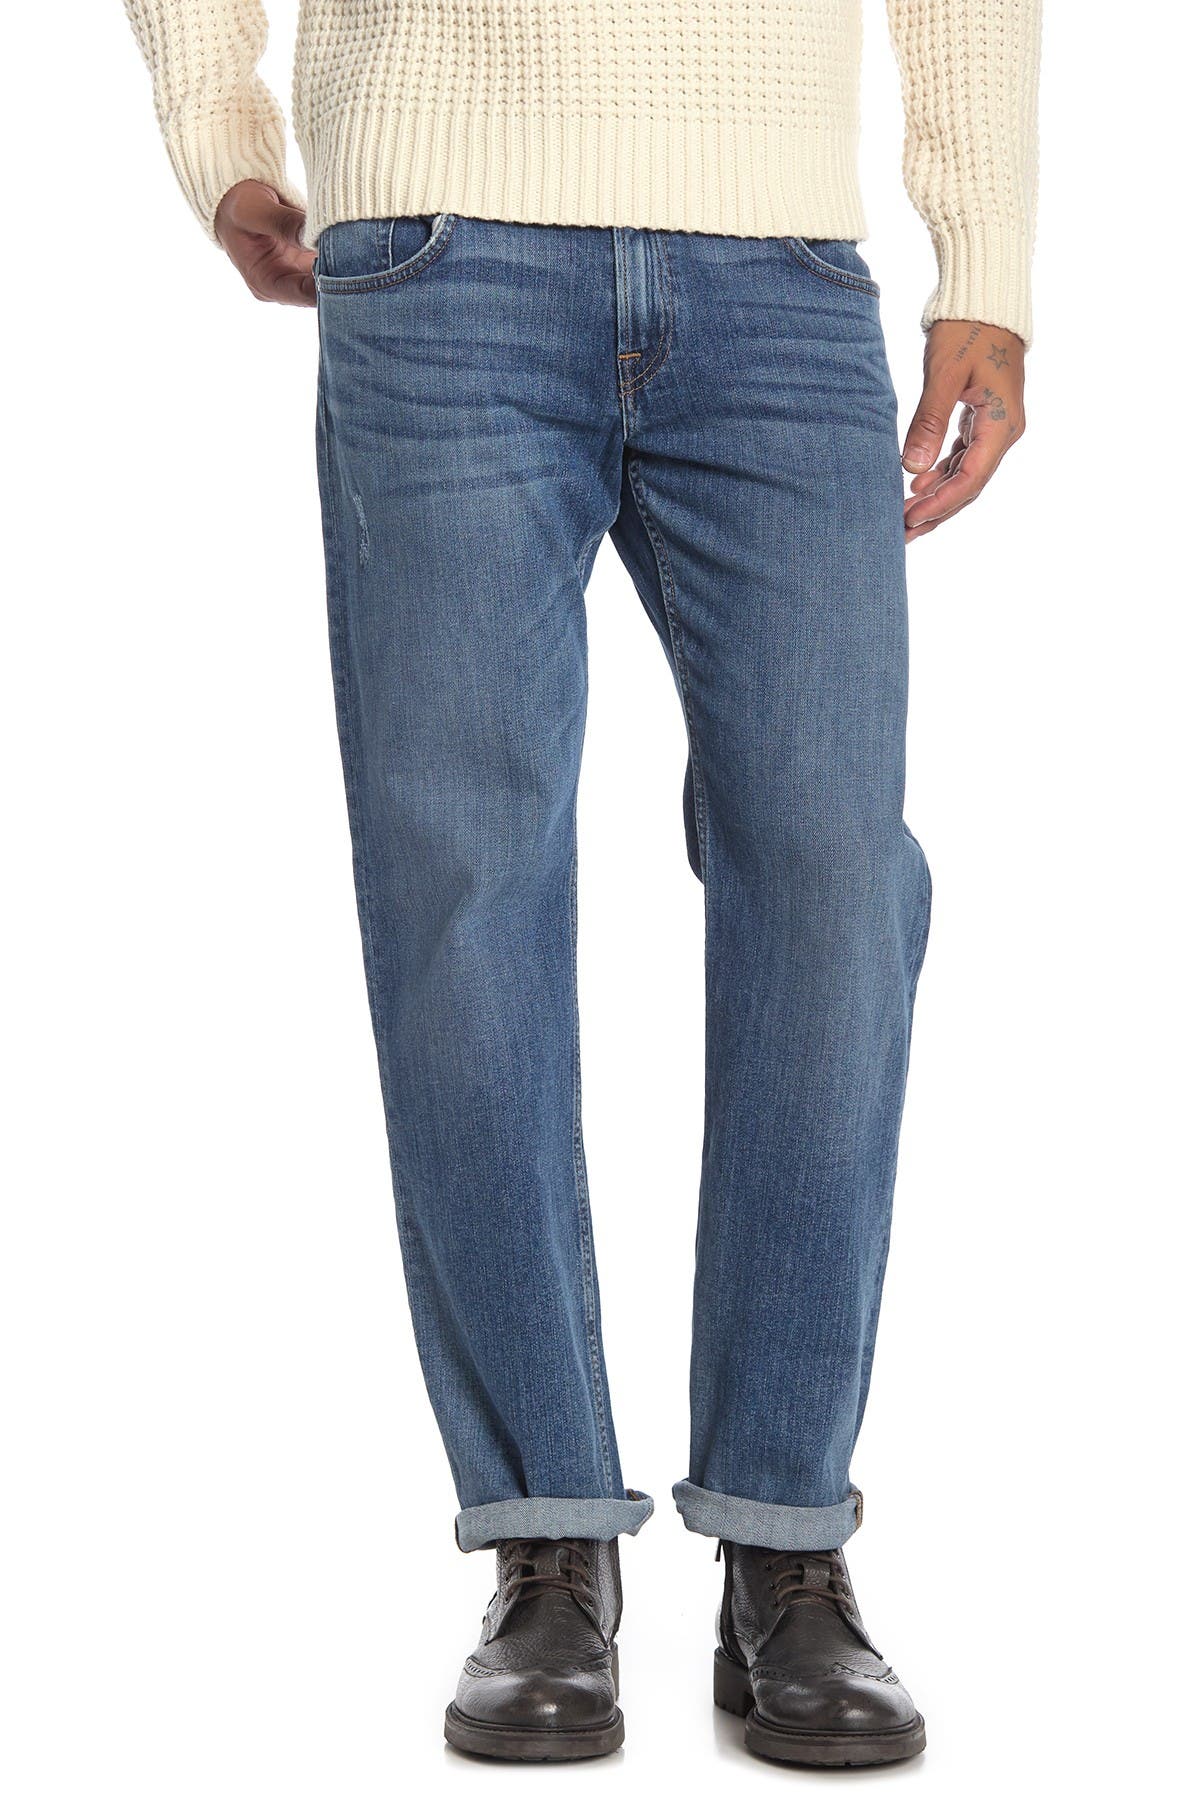 7 4 all mankind jeans